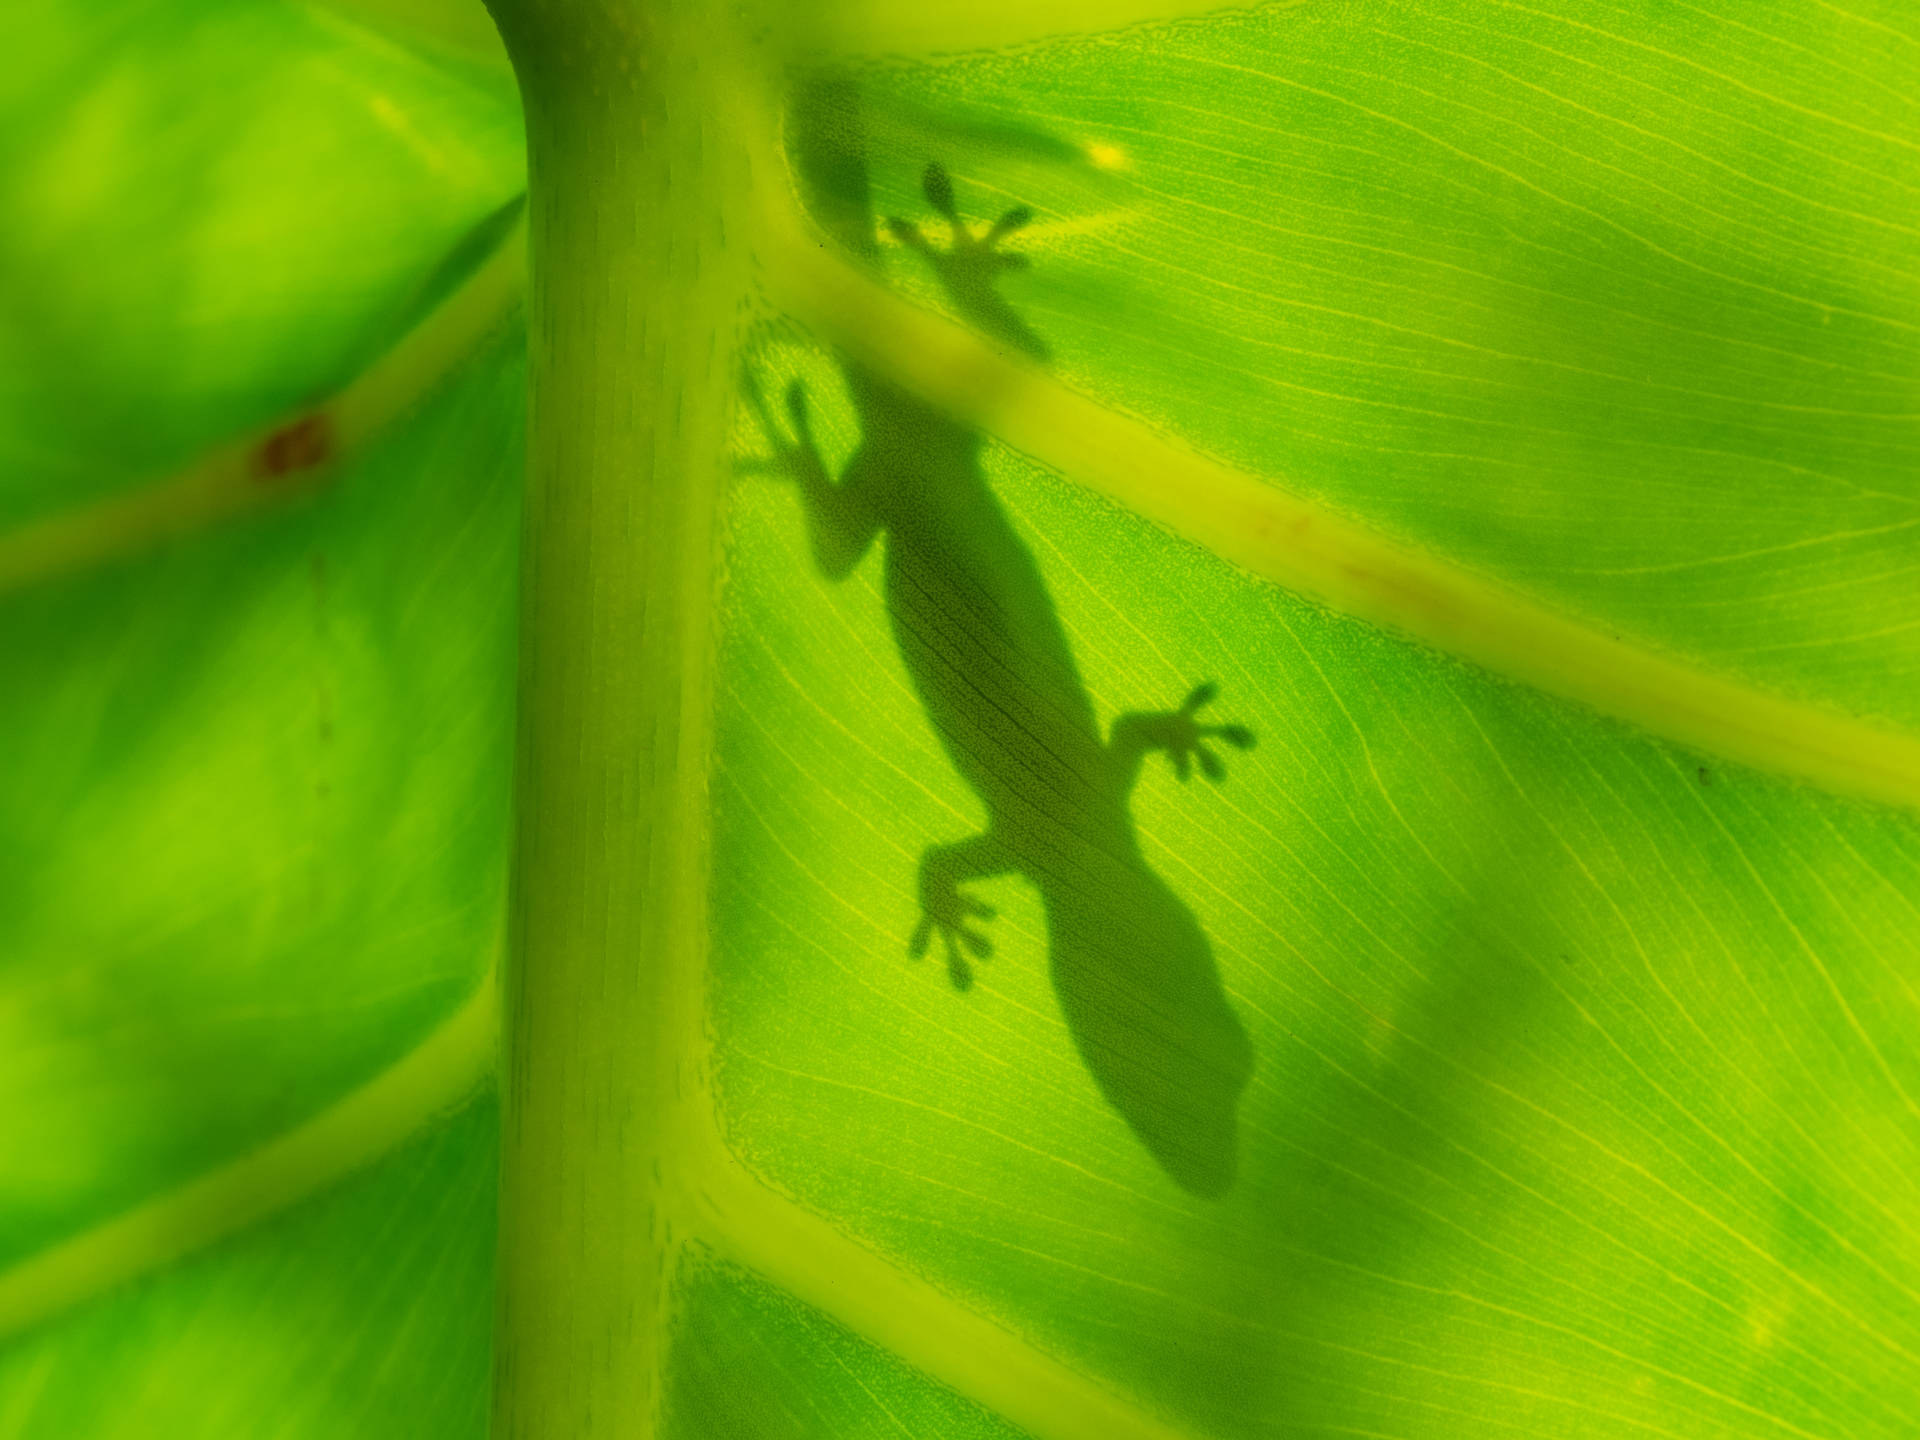 Lizard On Ombre Leaf